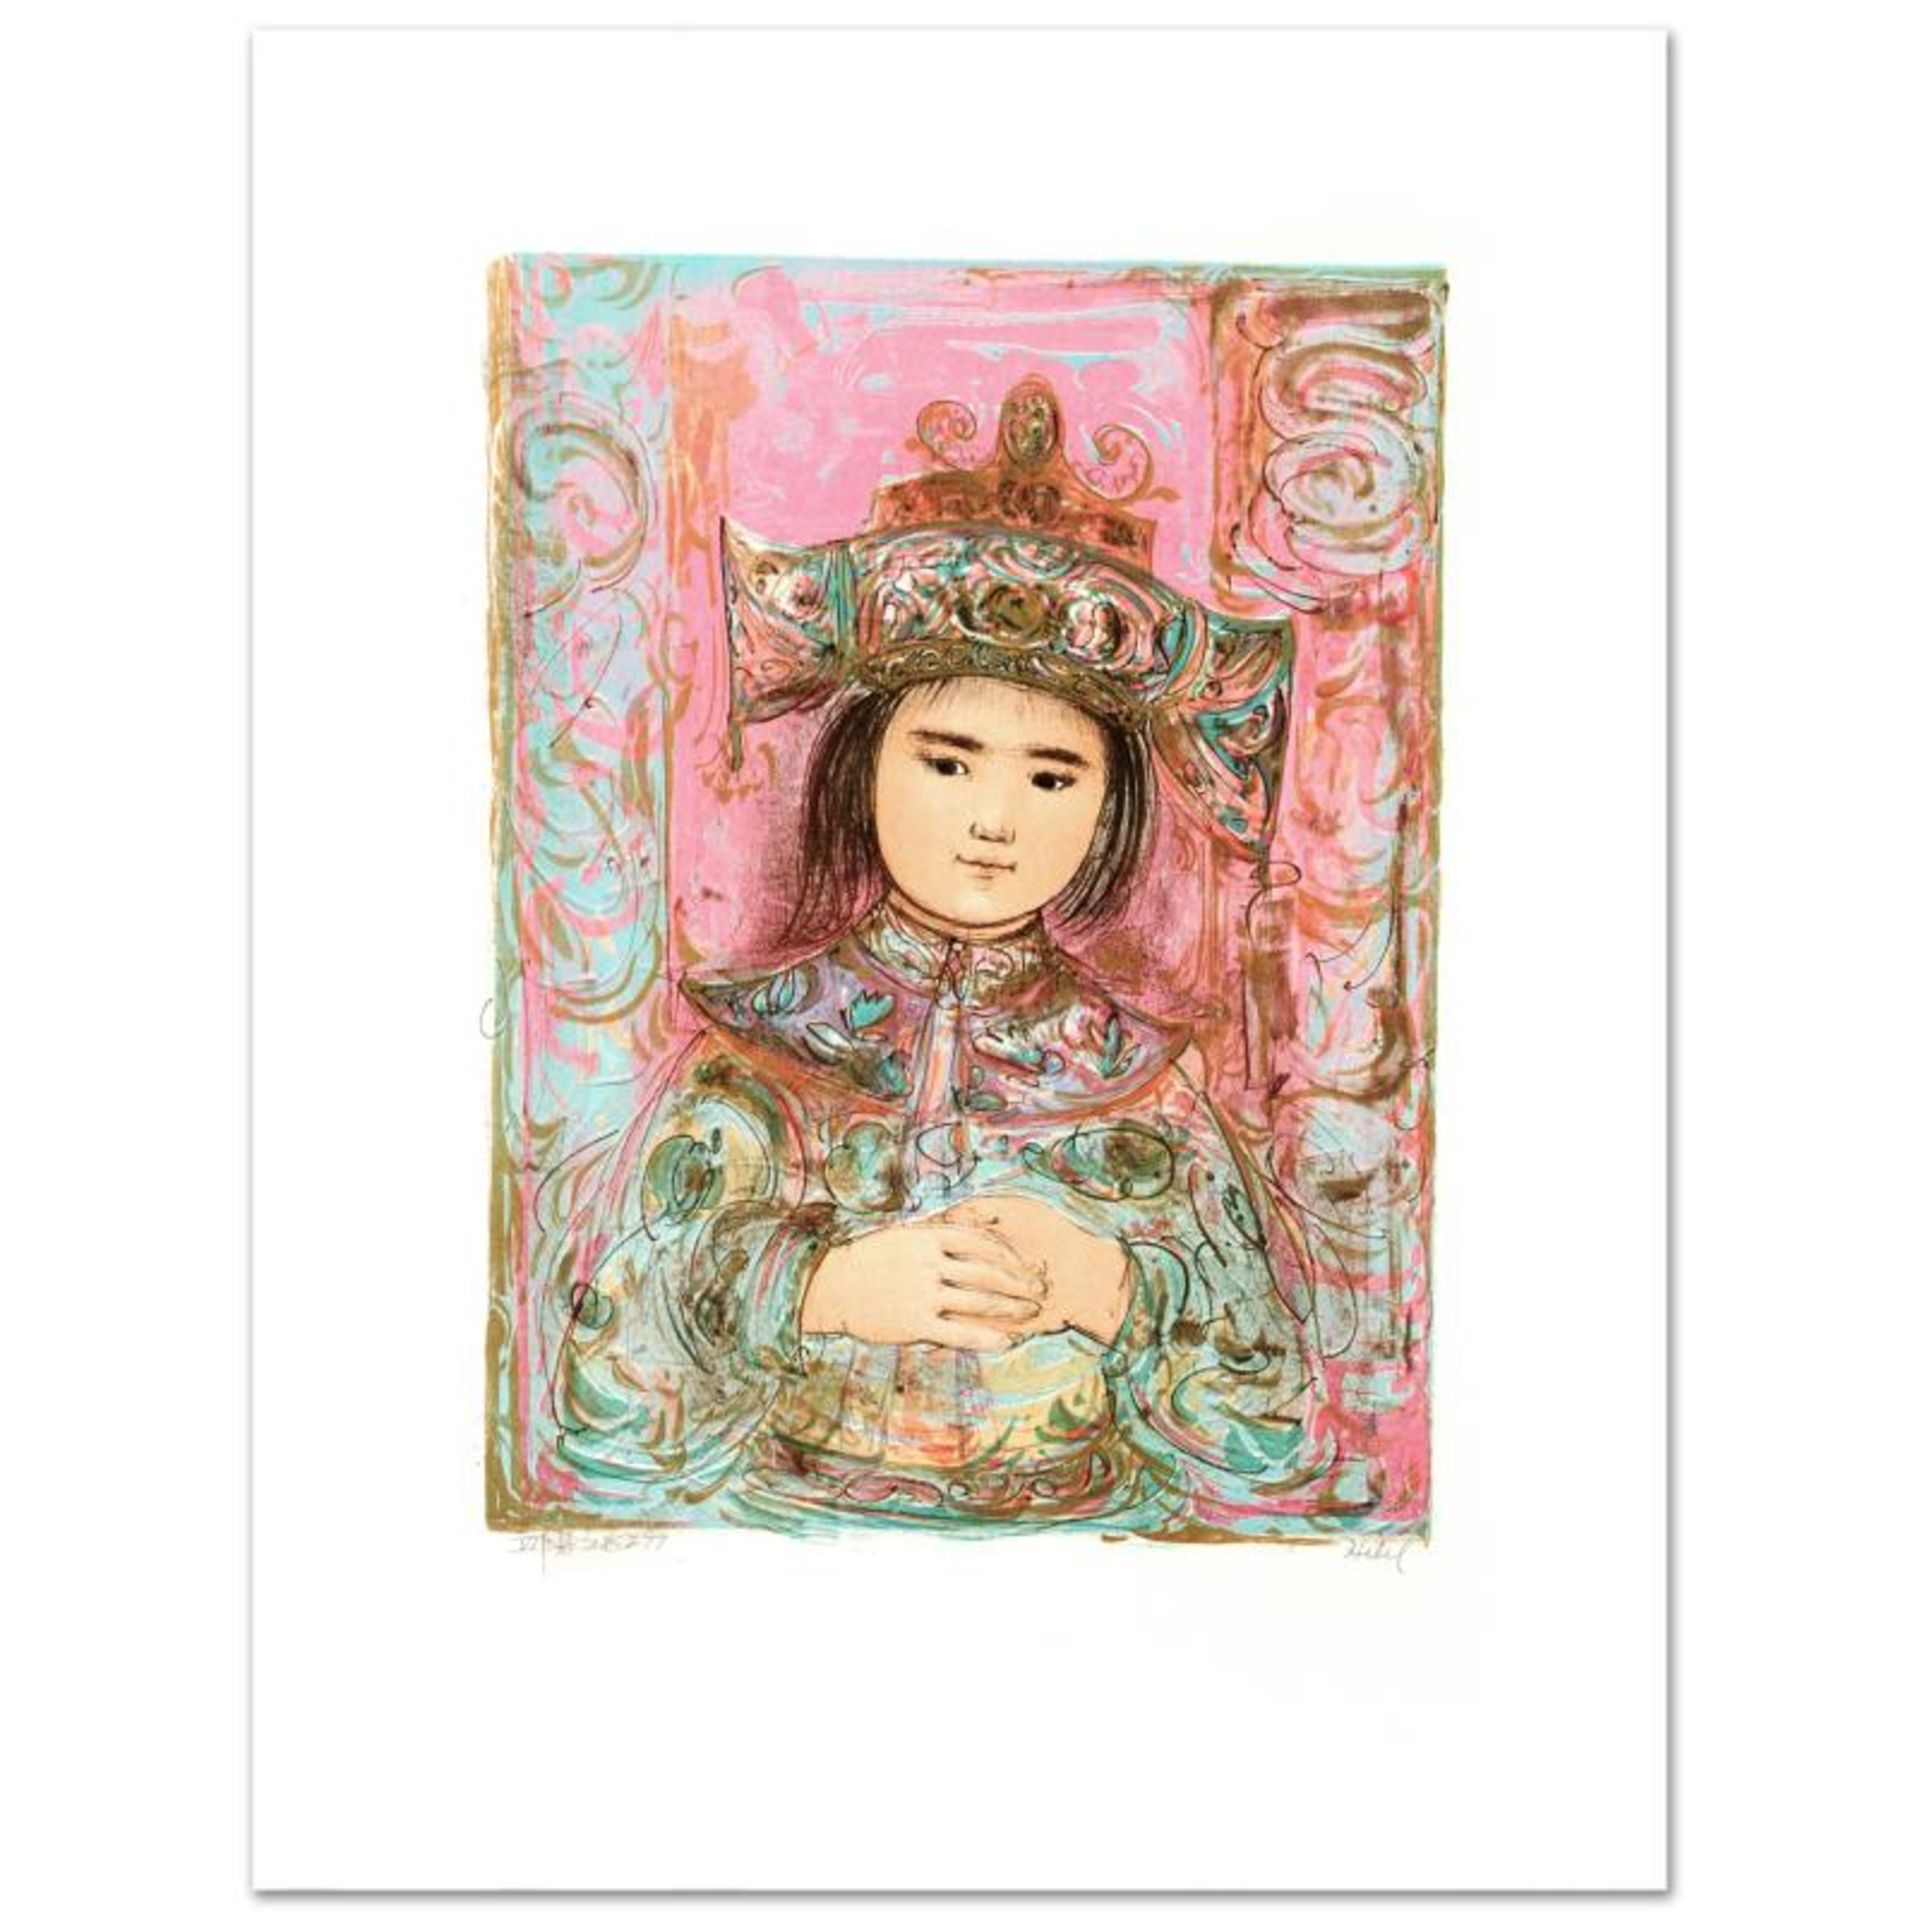 "Child of the East" Limited Edition Lithograph by Edna Hibel (1917-2014), Number